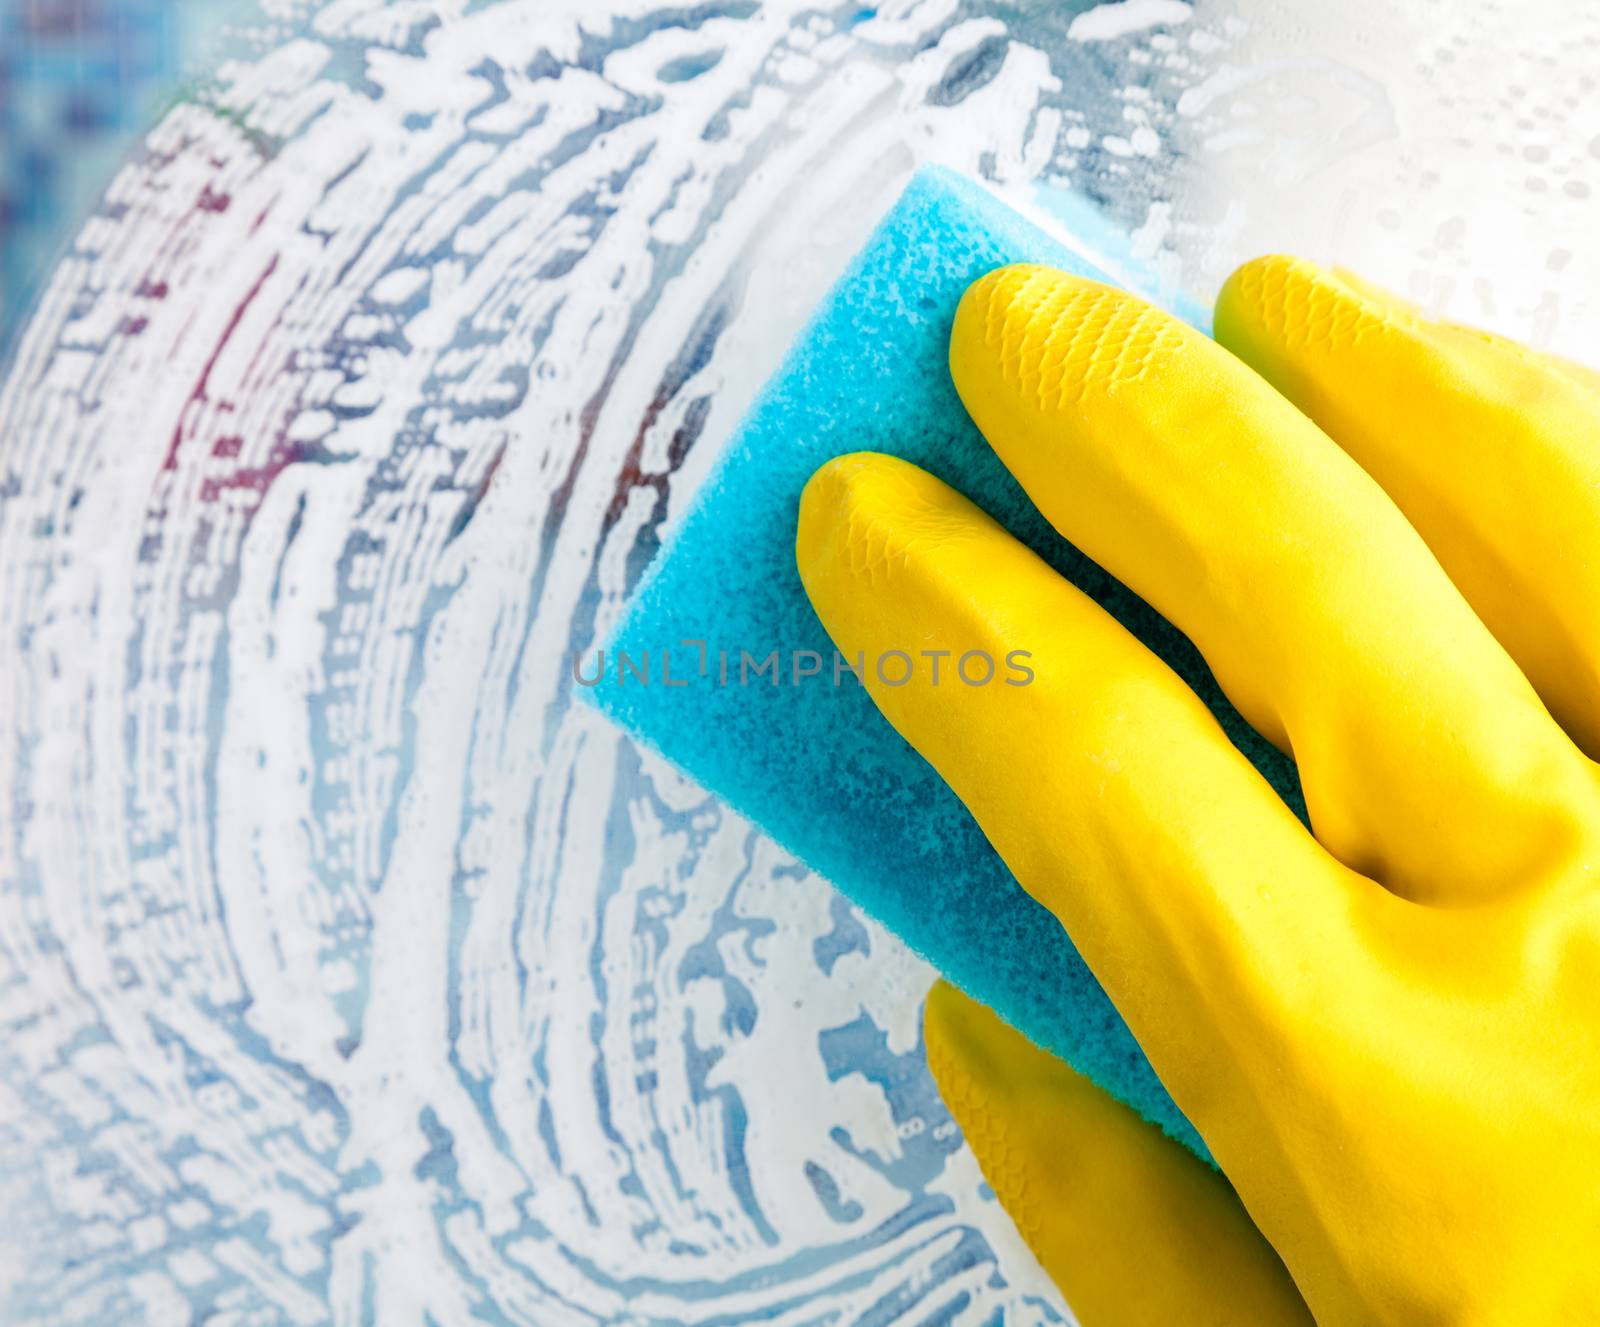 Hand in yellow protective glove cleaning glass with sponge